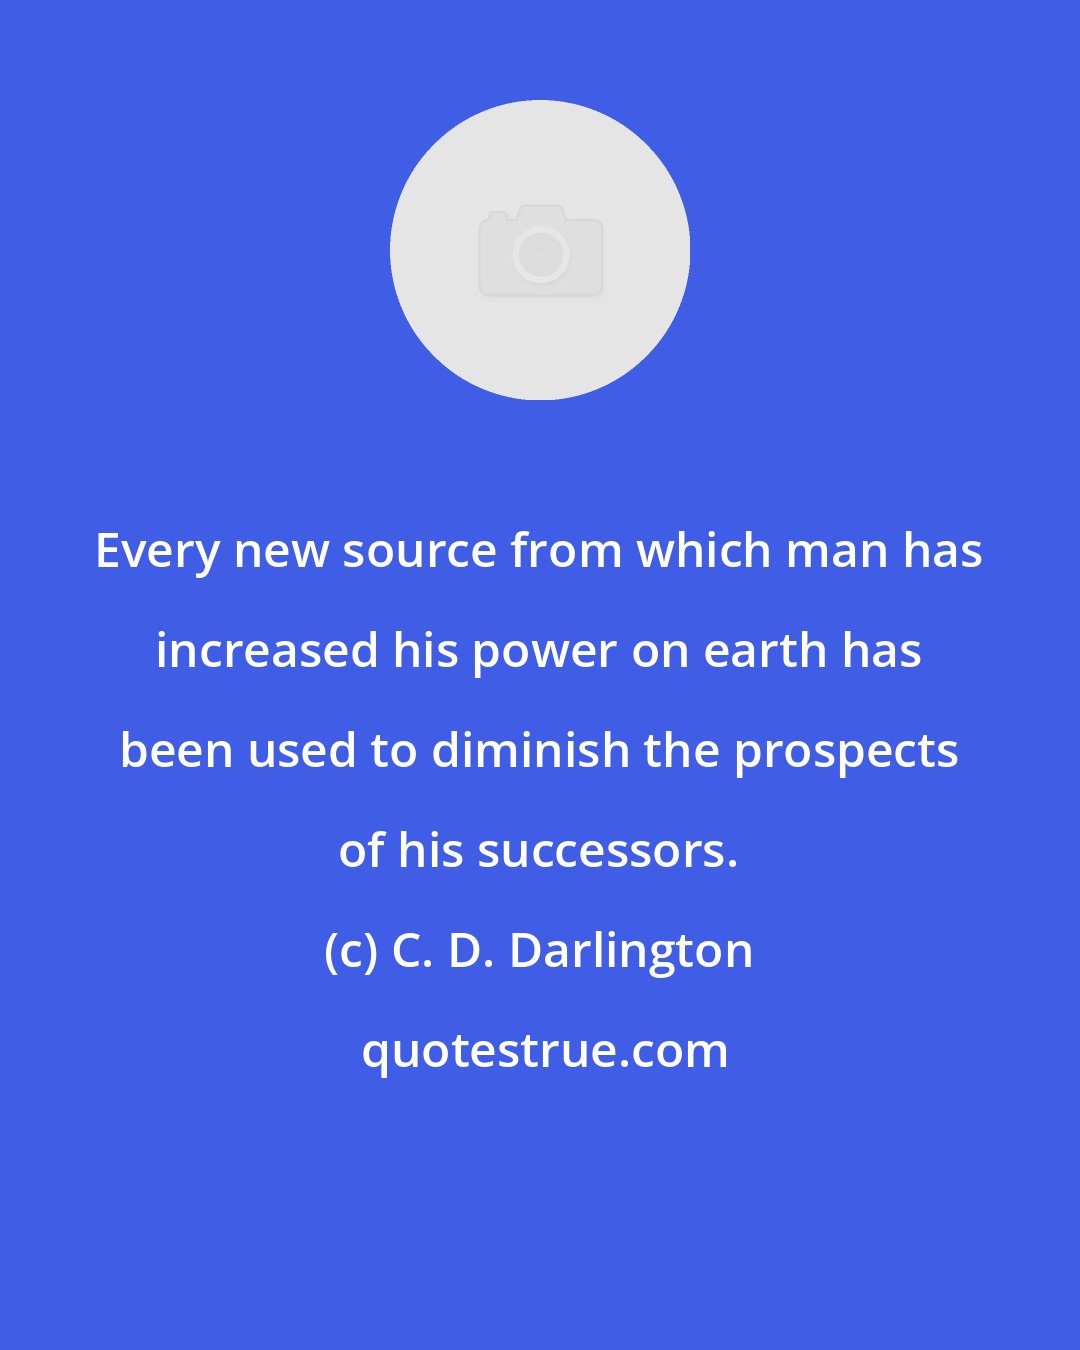 C. D. Darlington: Every new source from which man has increased his power on earth has been used to diminish the prospects of his successors.